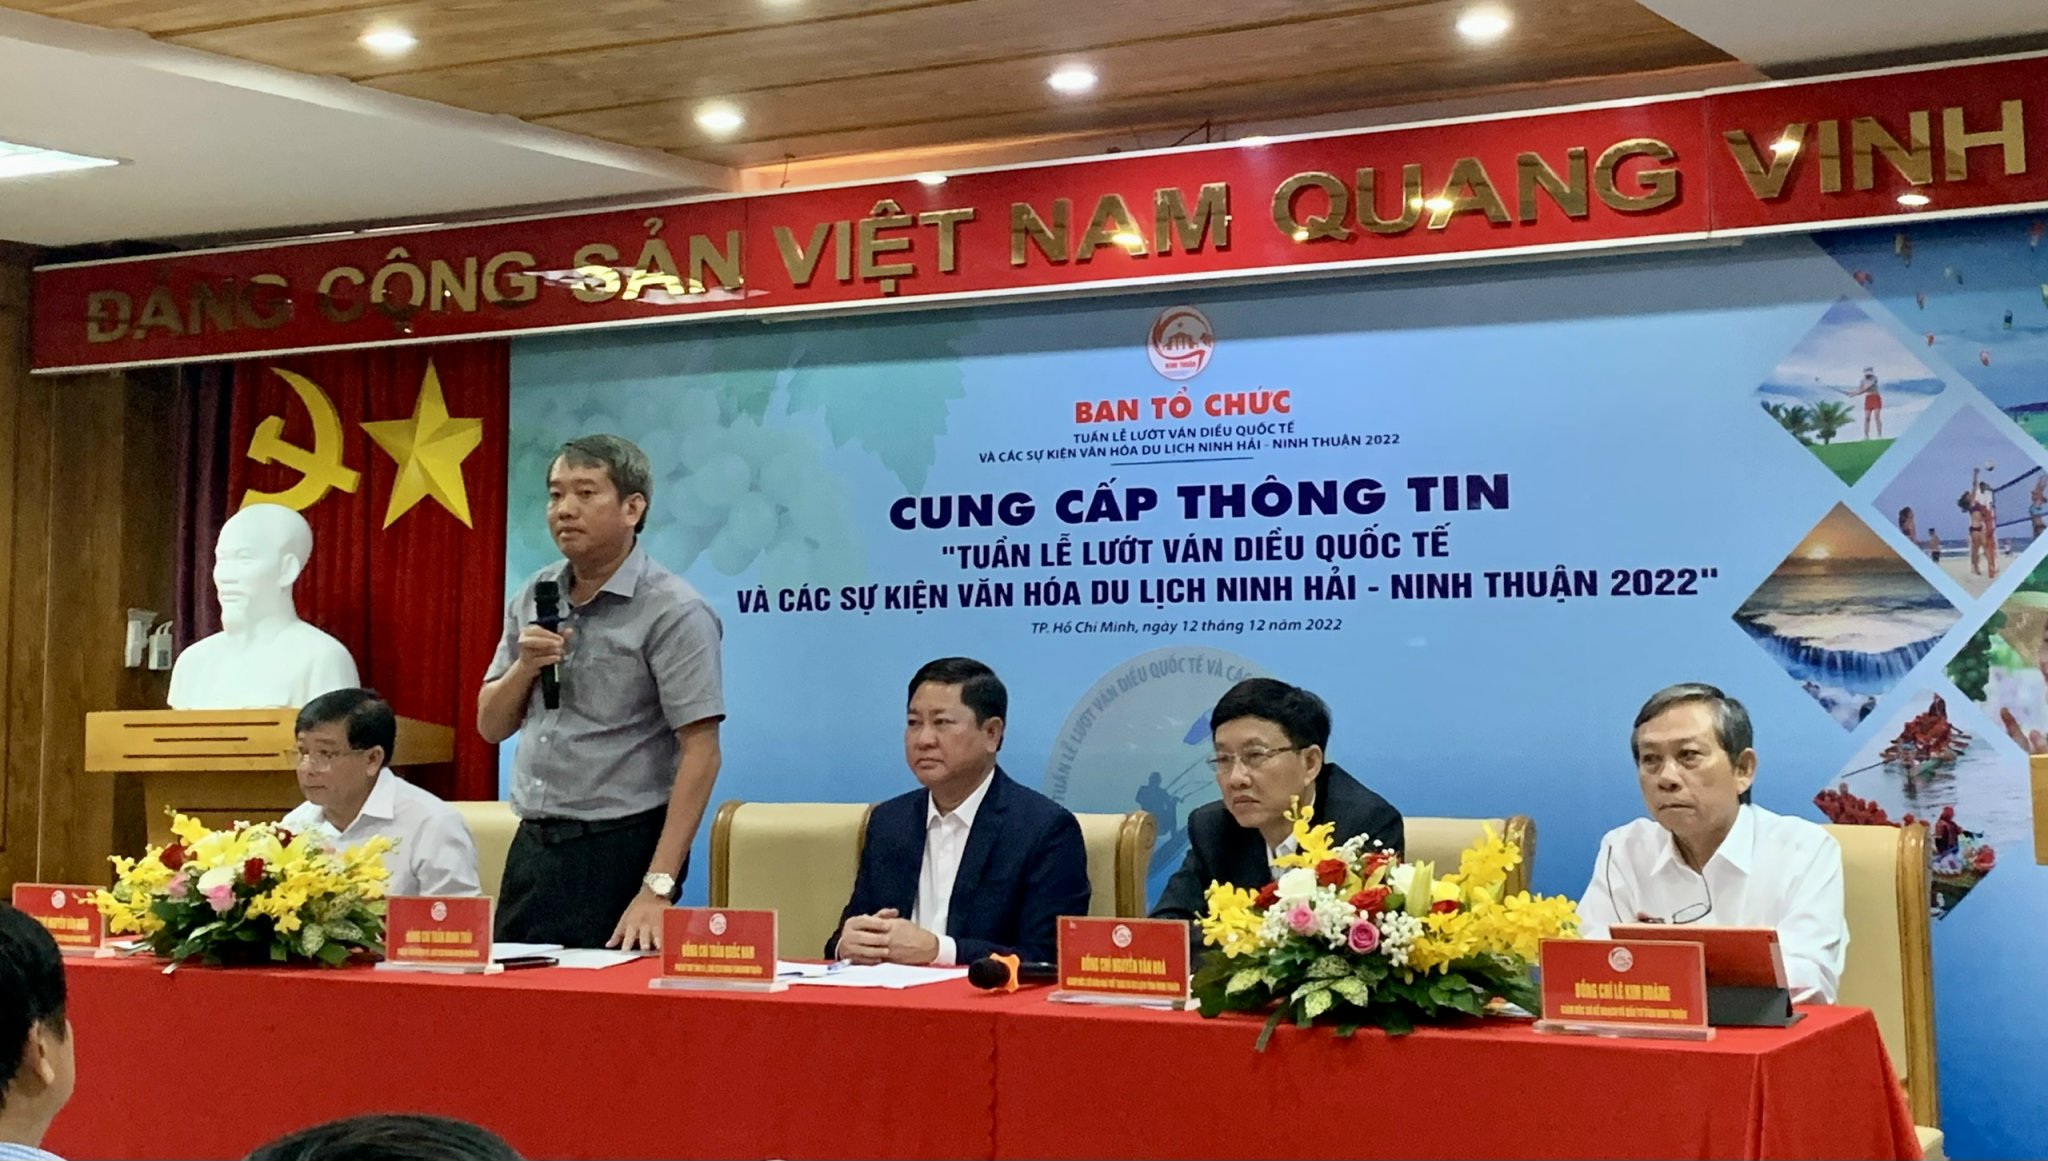 Tran Minh Thai, chairman of Ninh Hai District in Ninh Thuan Province, speaks at a press briefing on the International Kite Surfing Week to be held there from December 16 to 25, 2022 in this picture taken on December 12, 2022. Photo: Hoai Phuong / Tuoi Tre